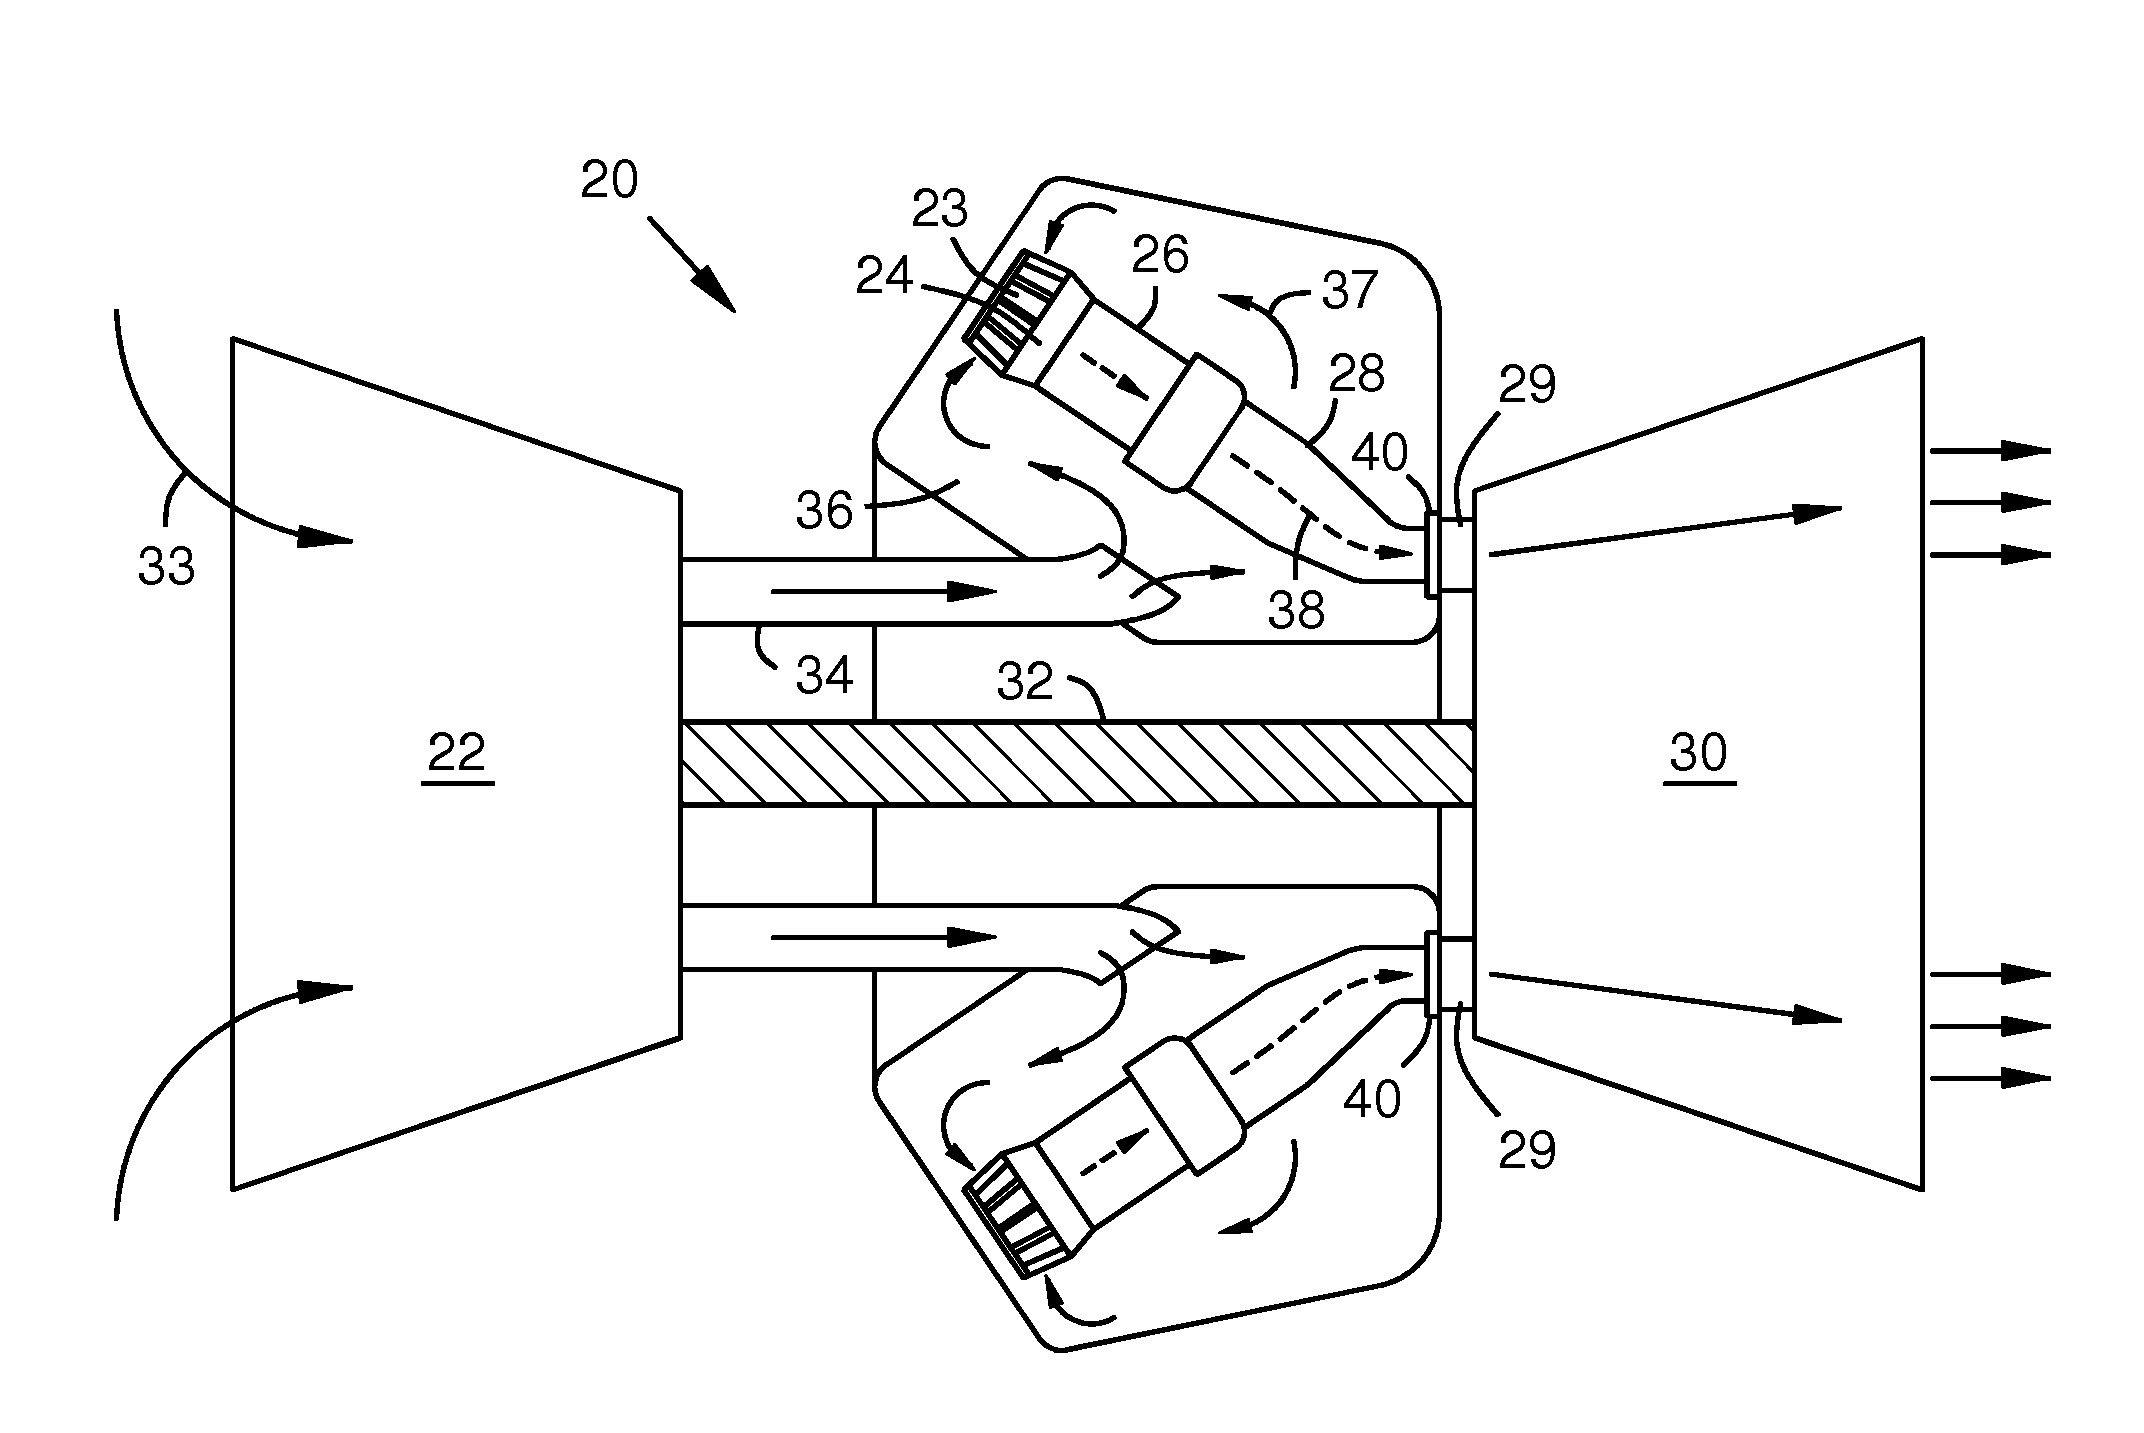 Structural frame for gas turbine combustion cap assembly